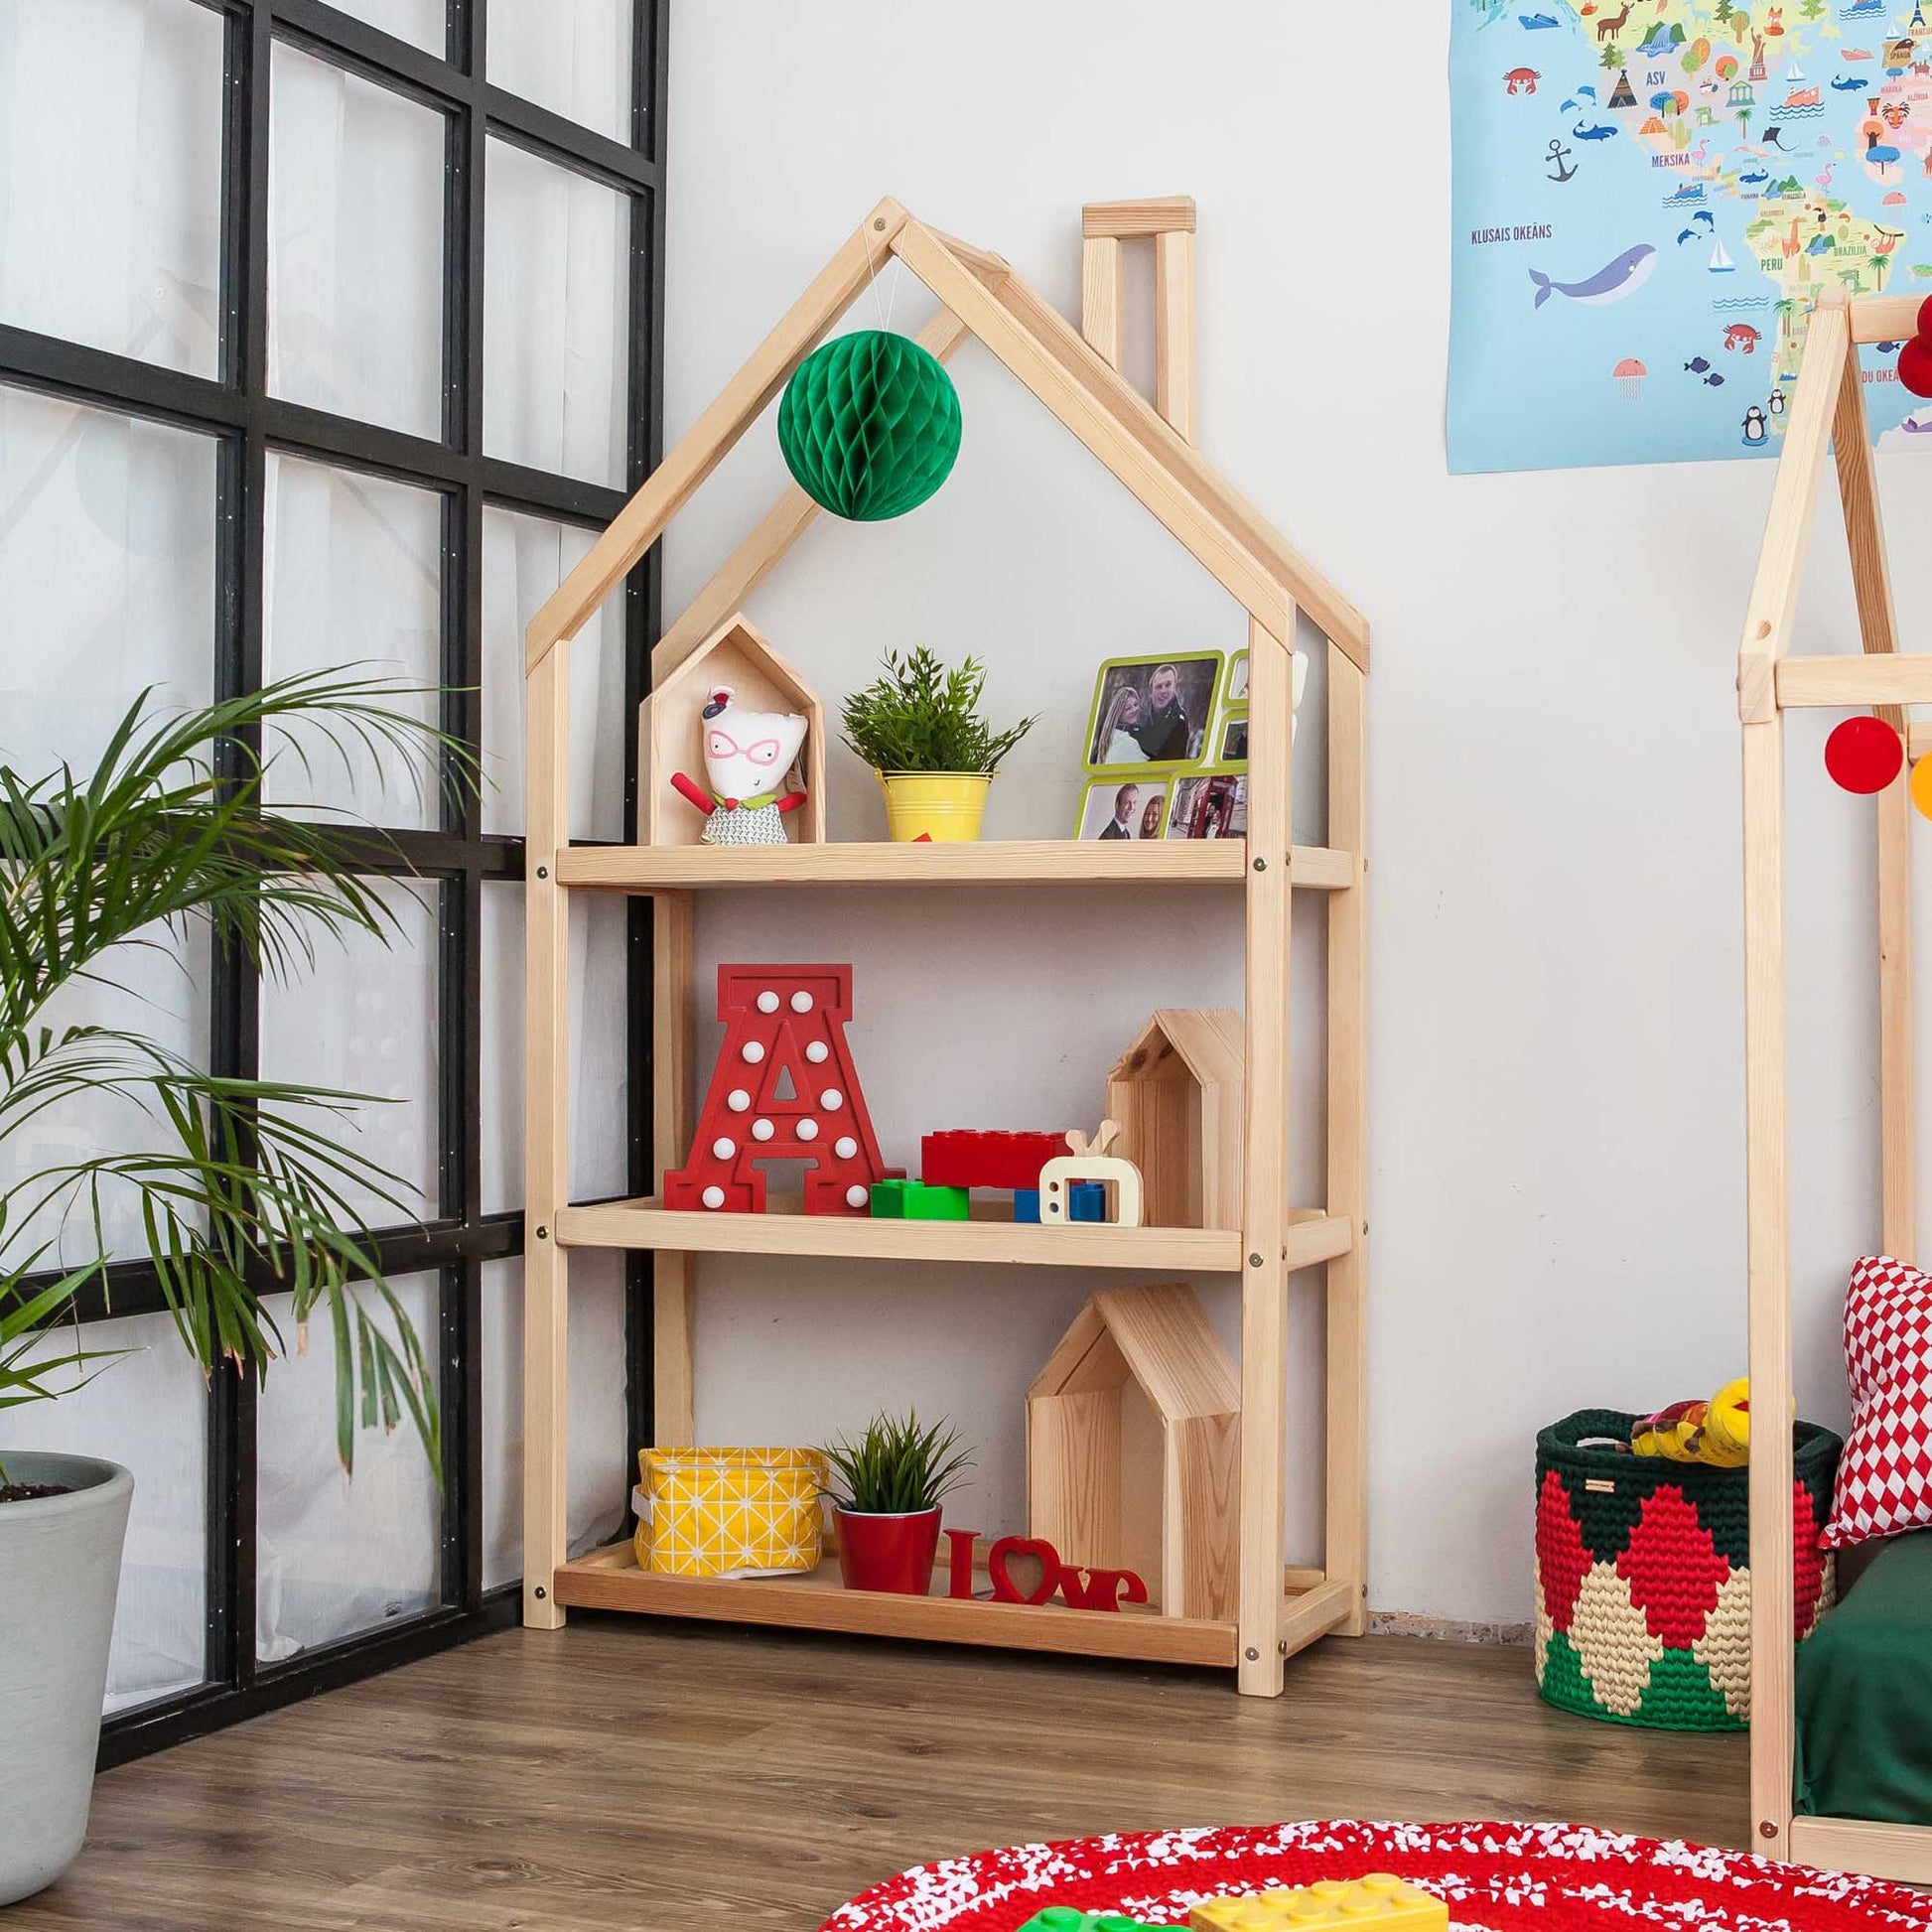 A children's room with an open House-shaped Montessori shelf and Sweet Home From Wood toys.